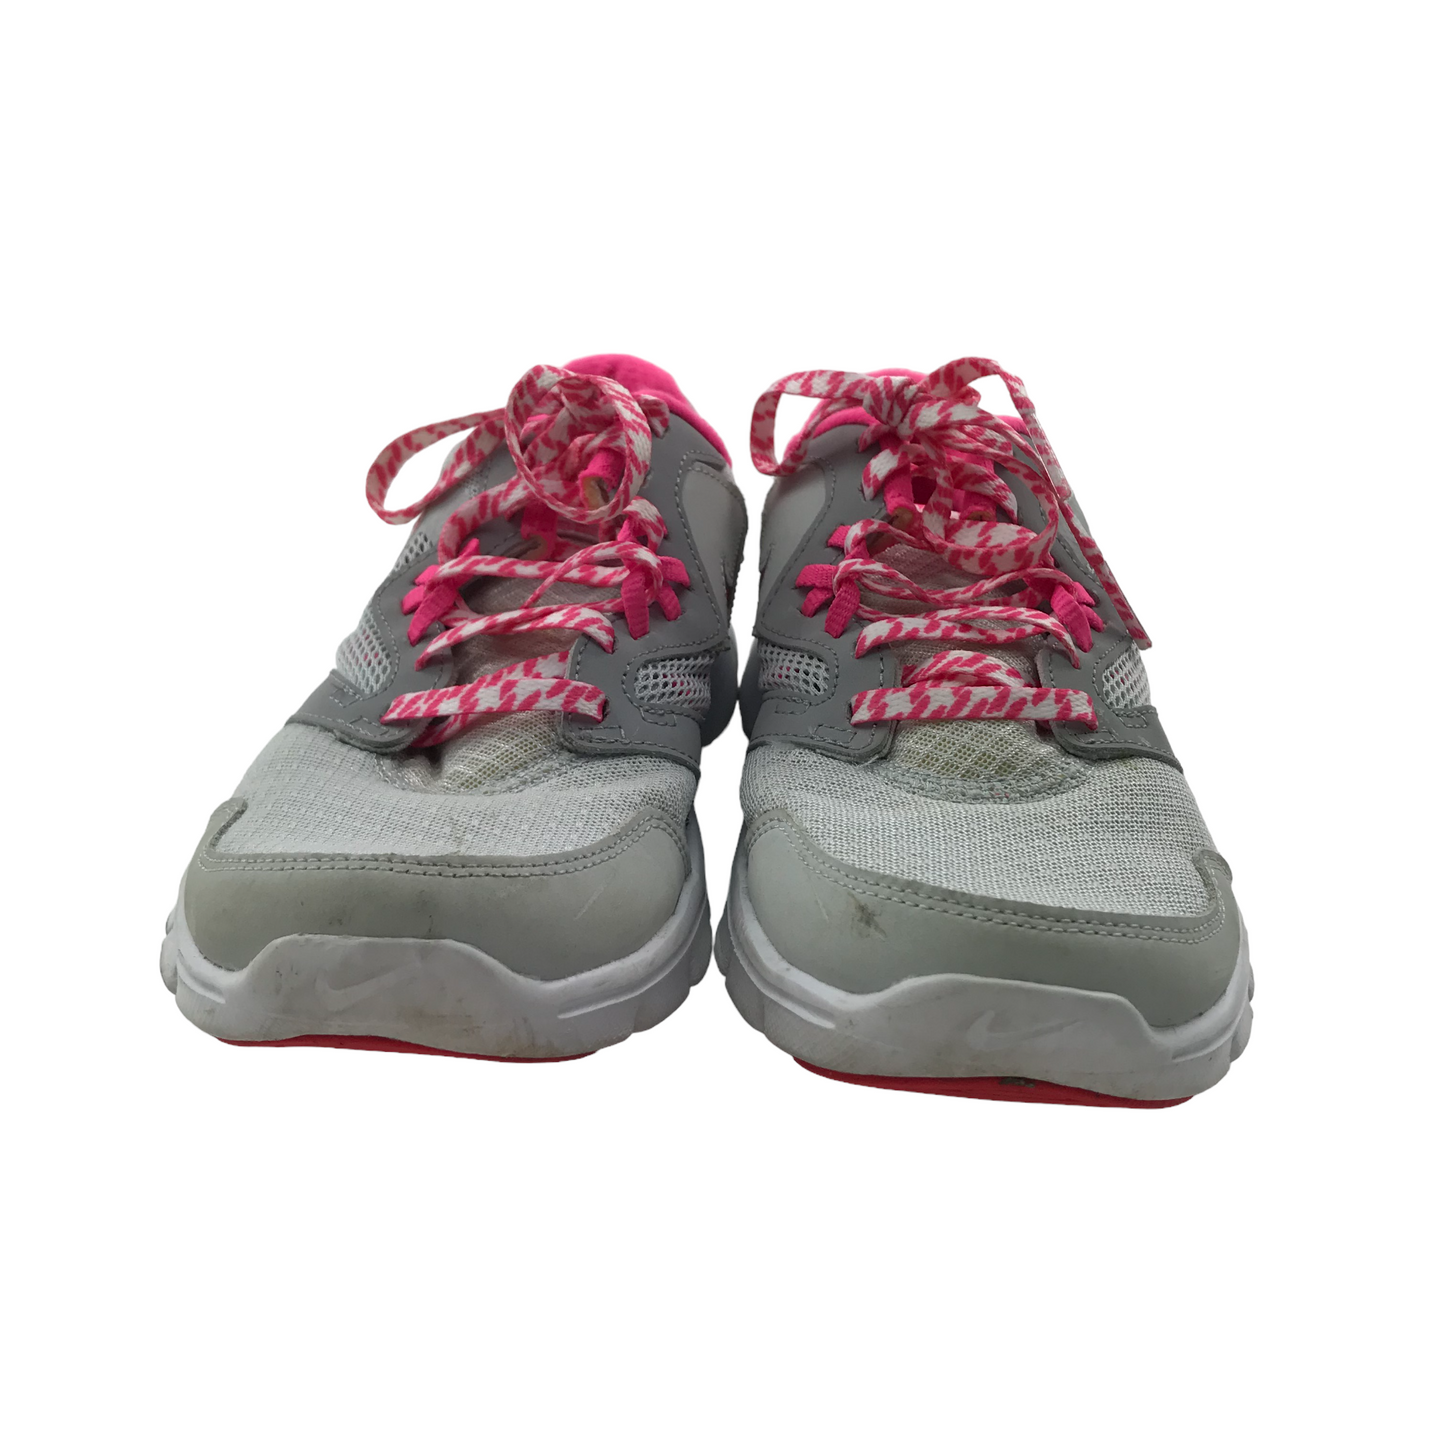 Nike Flex Experience RN 3 Grey and Pink Trainers Shoe Size 4.5